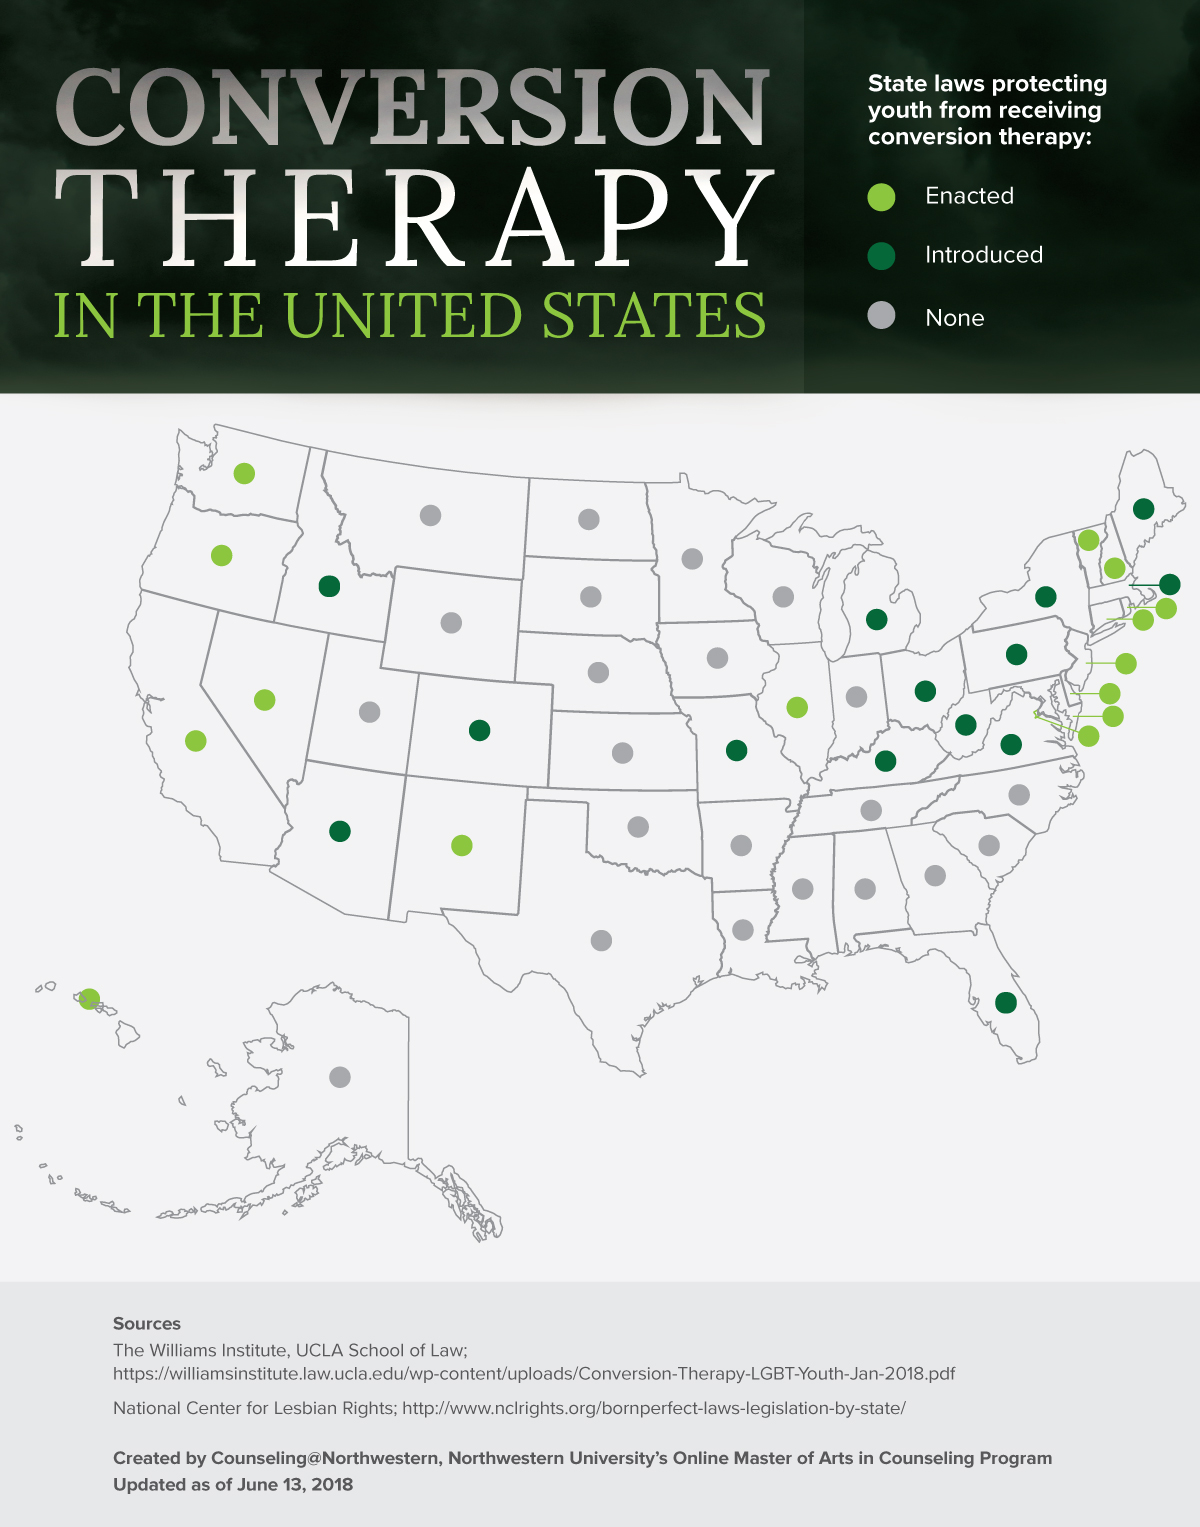 in-the-aftermath-of-conversion-therapy-counselors-offer-healing-support